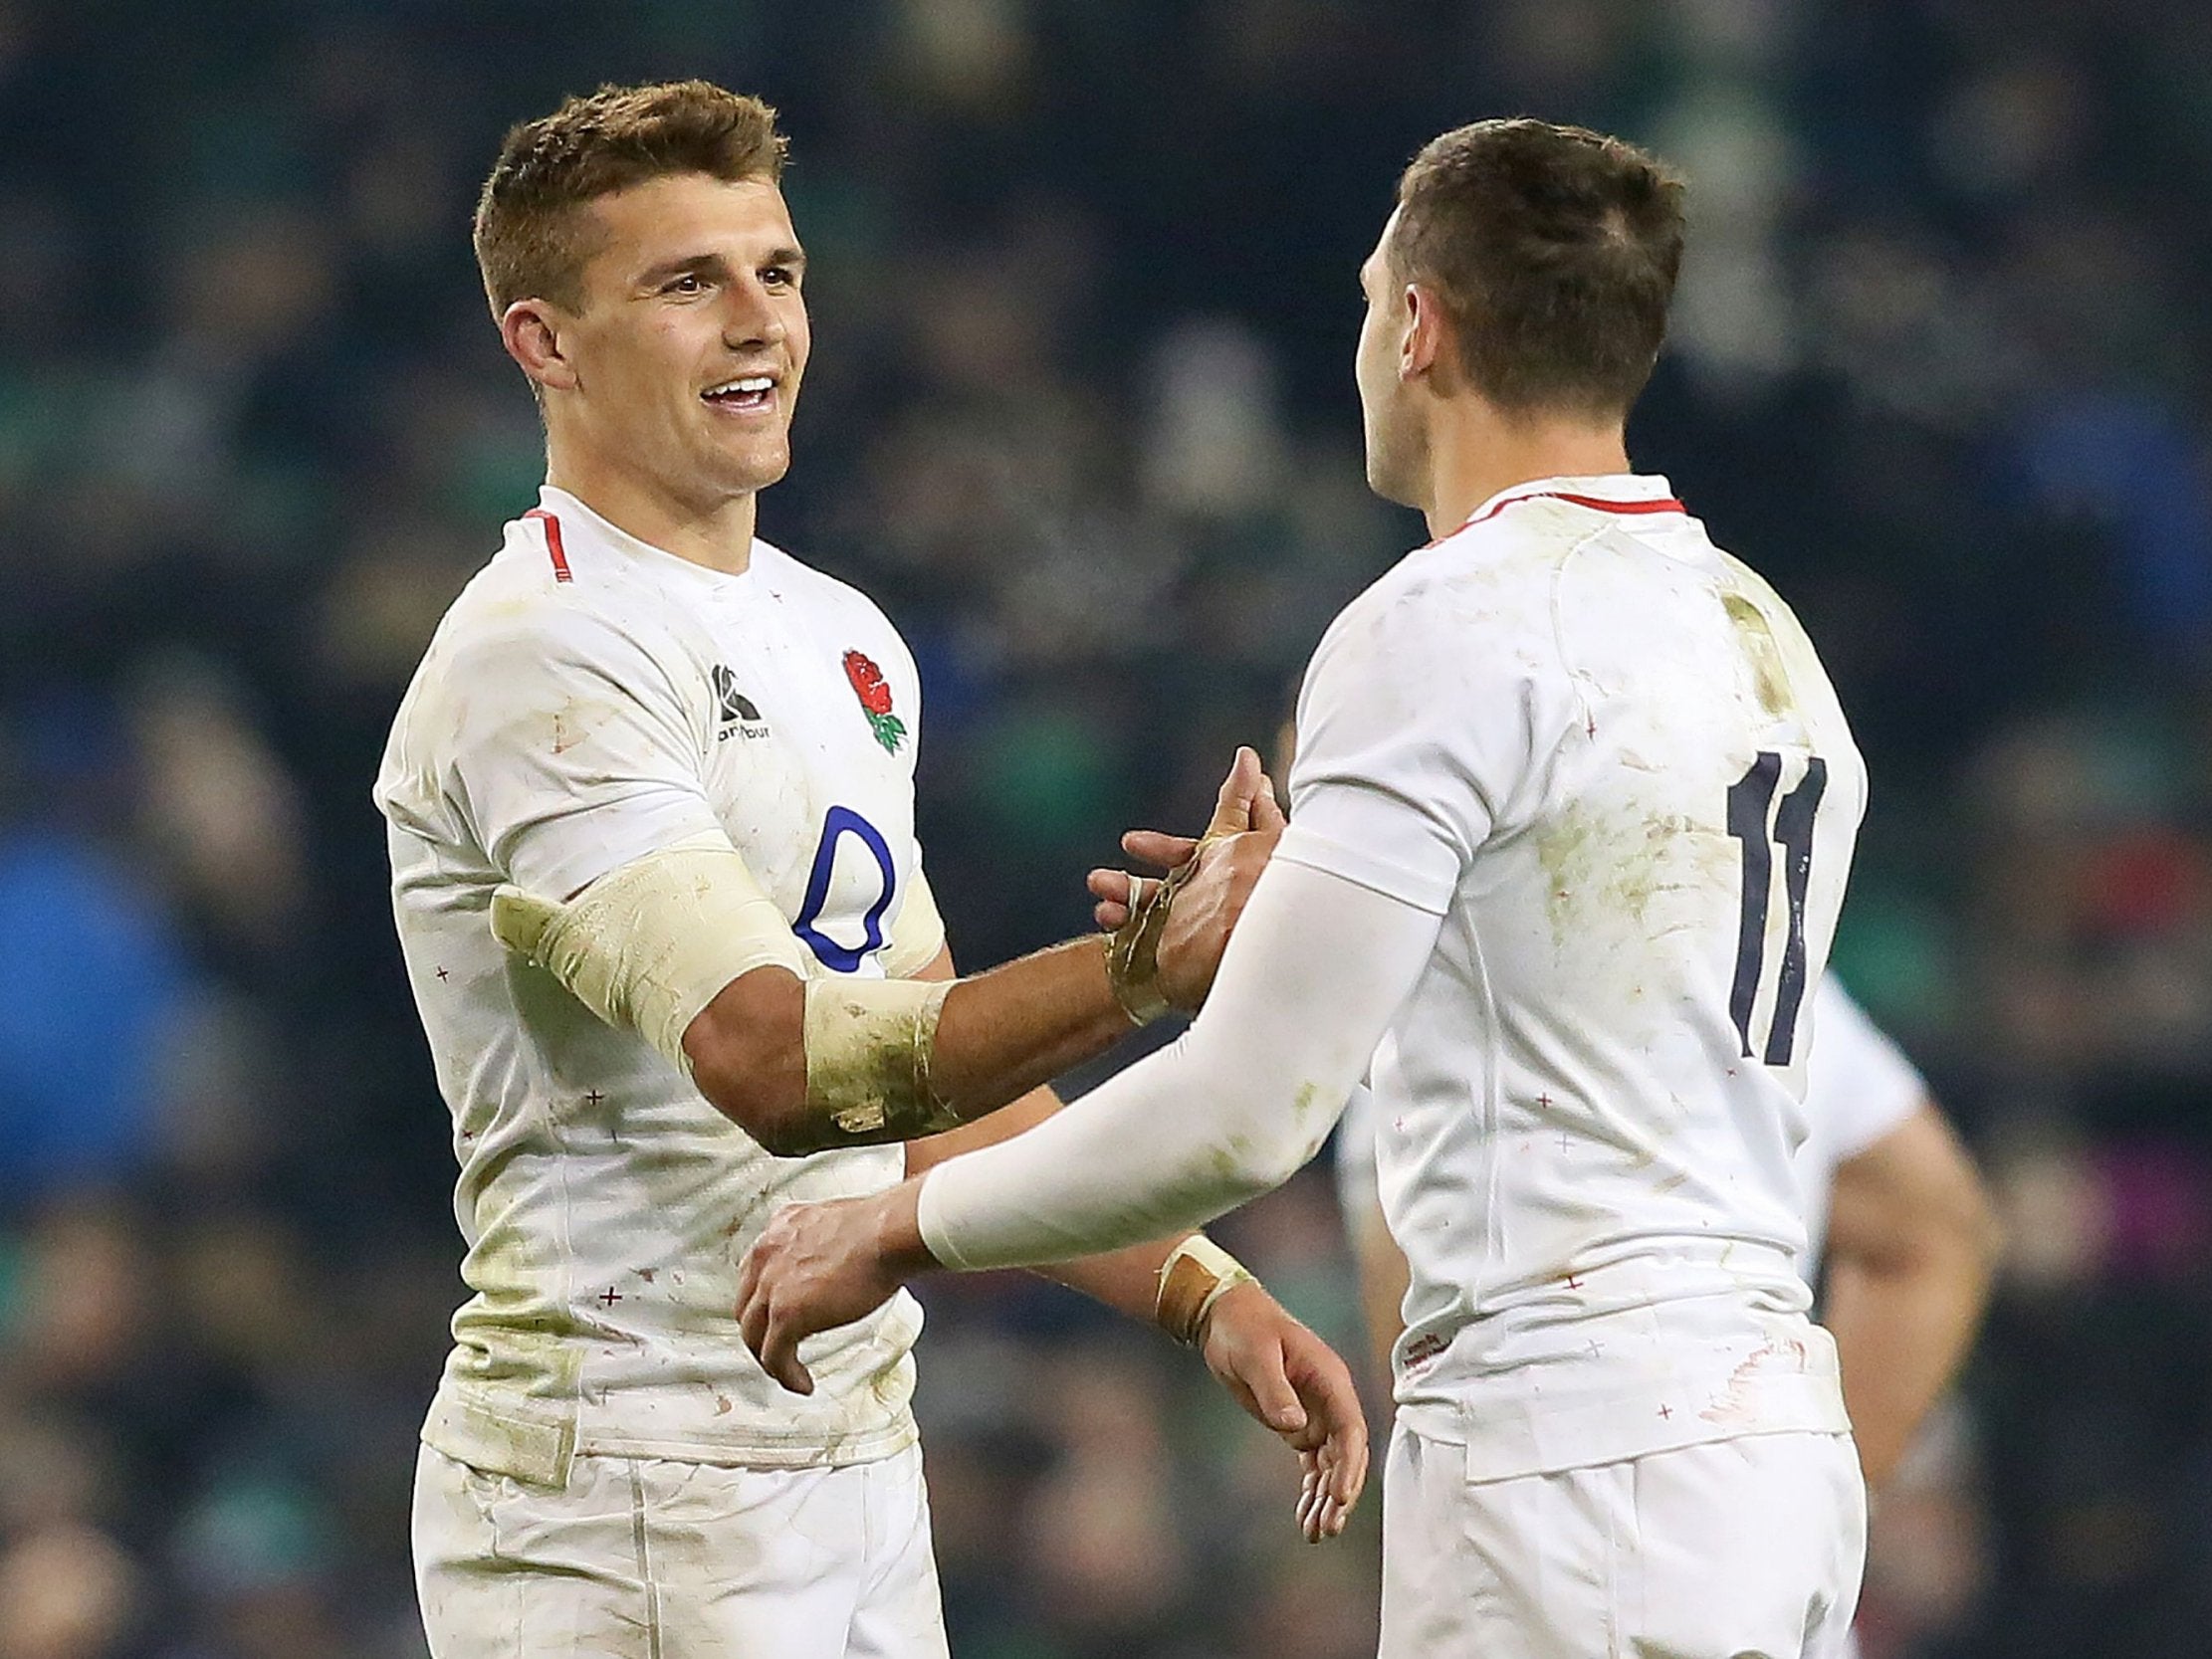 Henry Slade lifted the lid on England's team-bonding session at a London darts club